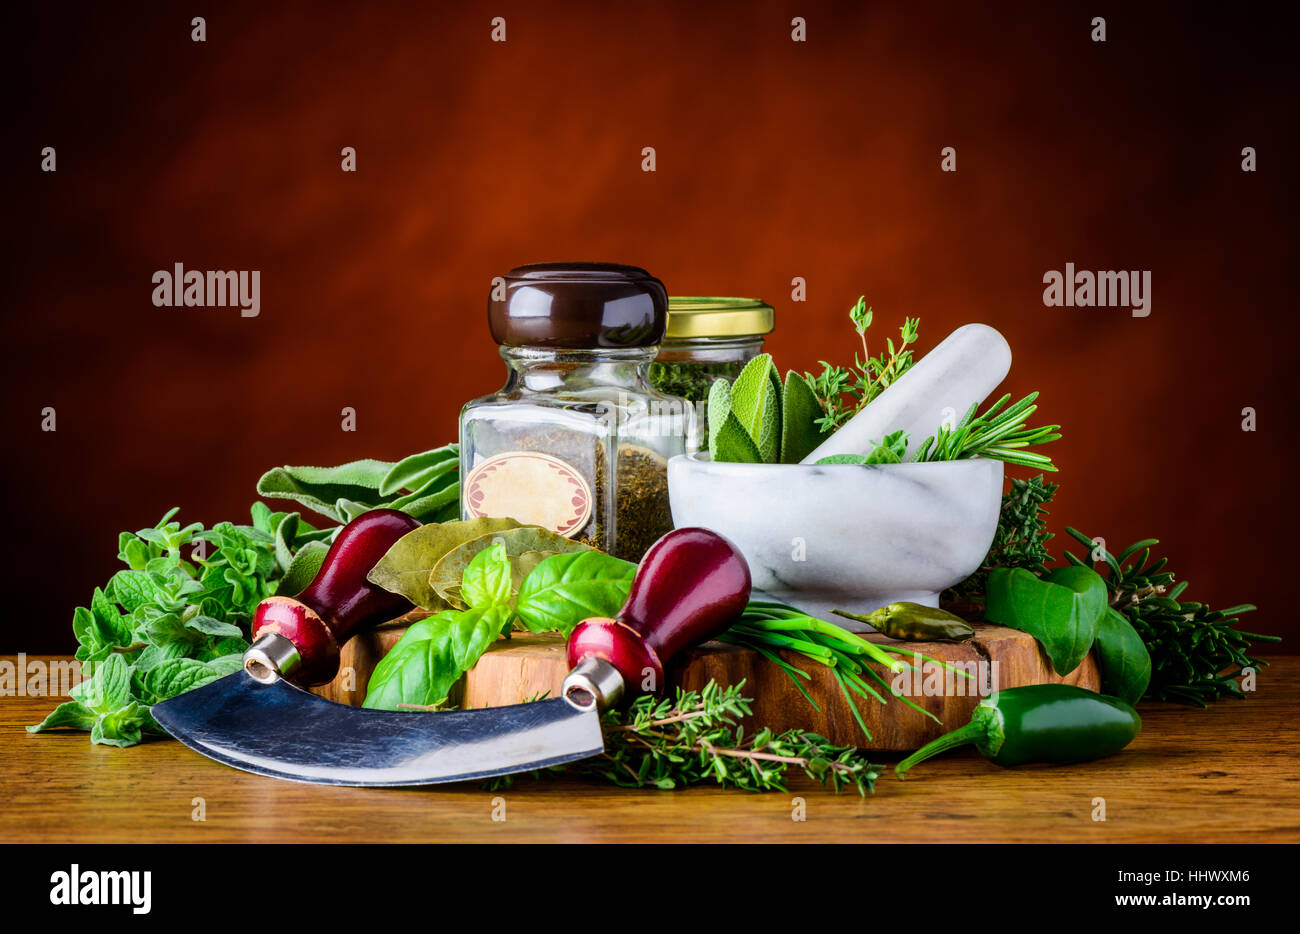 Green Cooking Herbs basil, rosemary, dill, sage with mezaluna herbs chopper and pestle & mortar Stock Photo